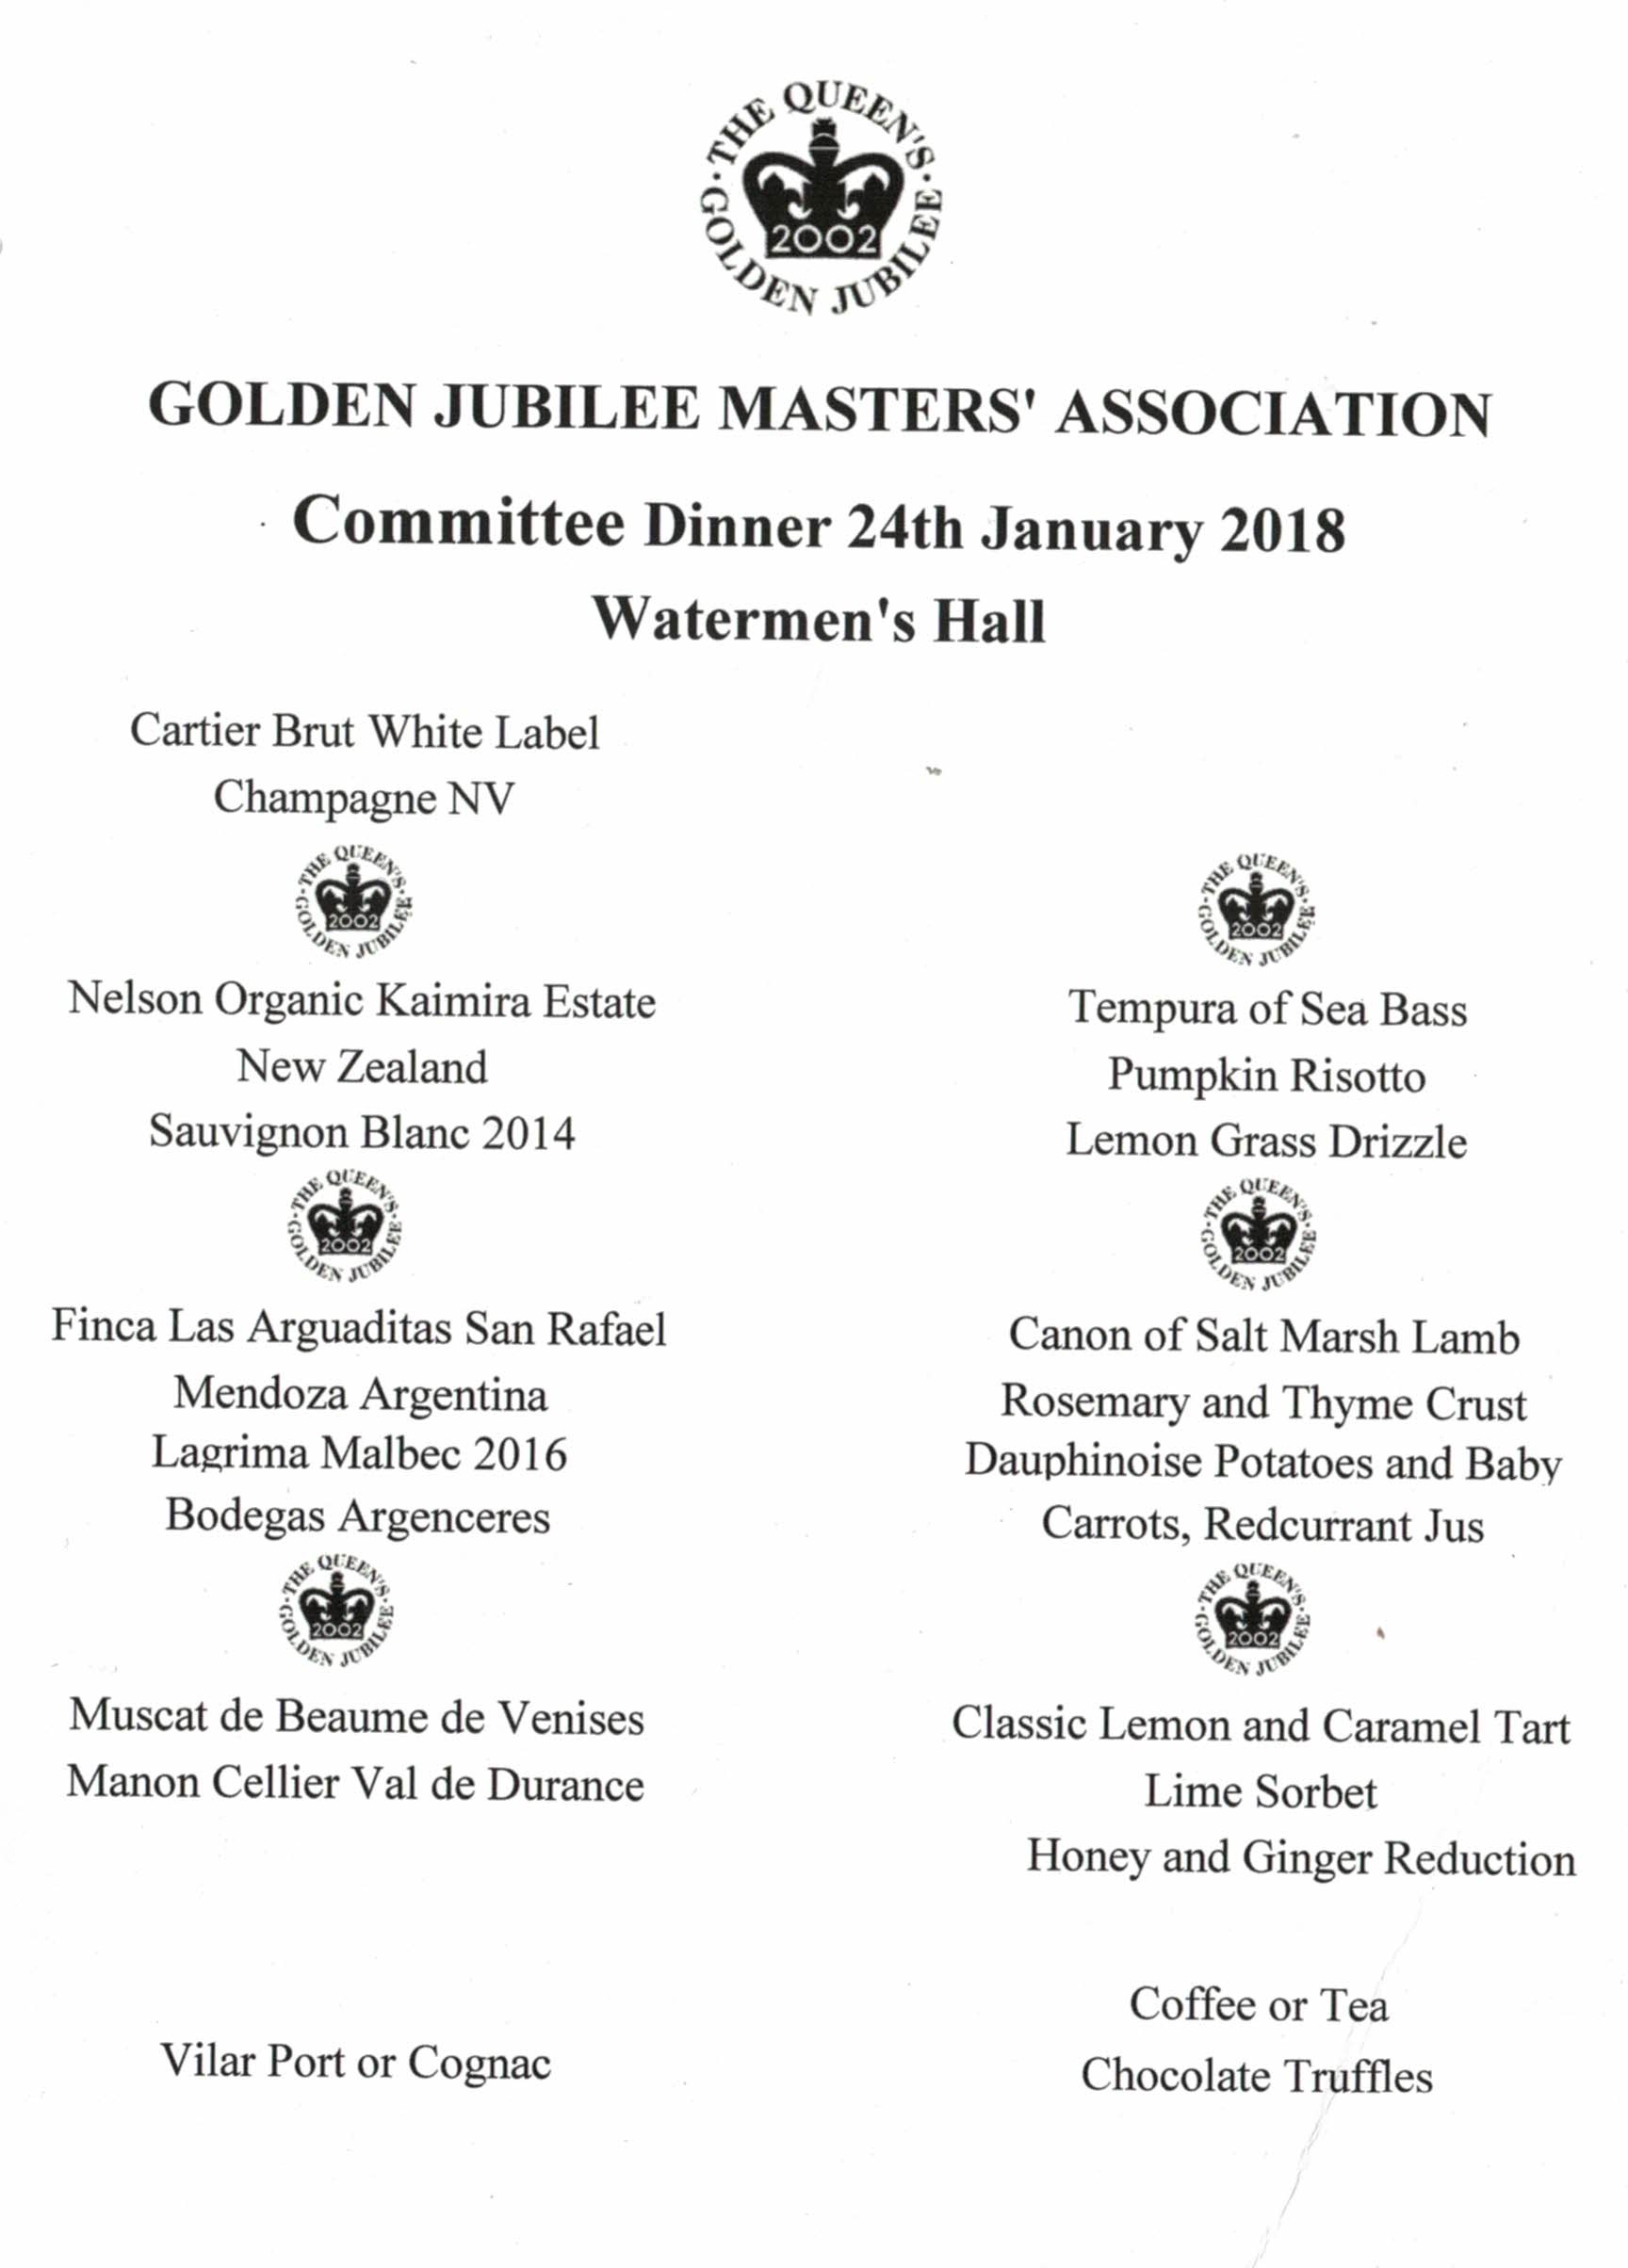 Livery Masters 2002 - Dinner, Jan 2018